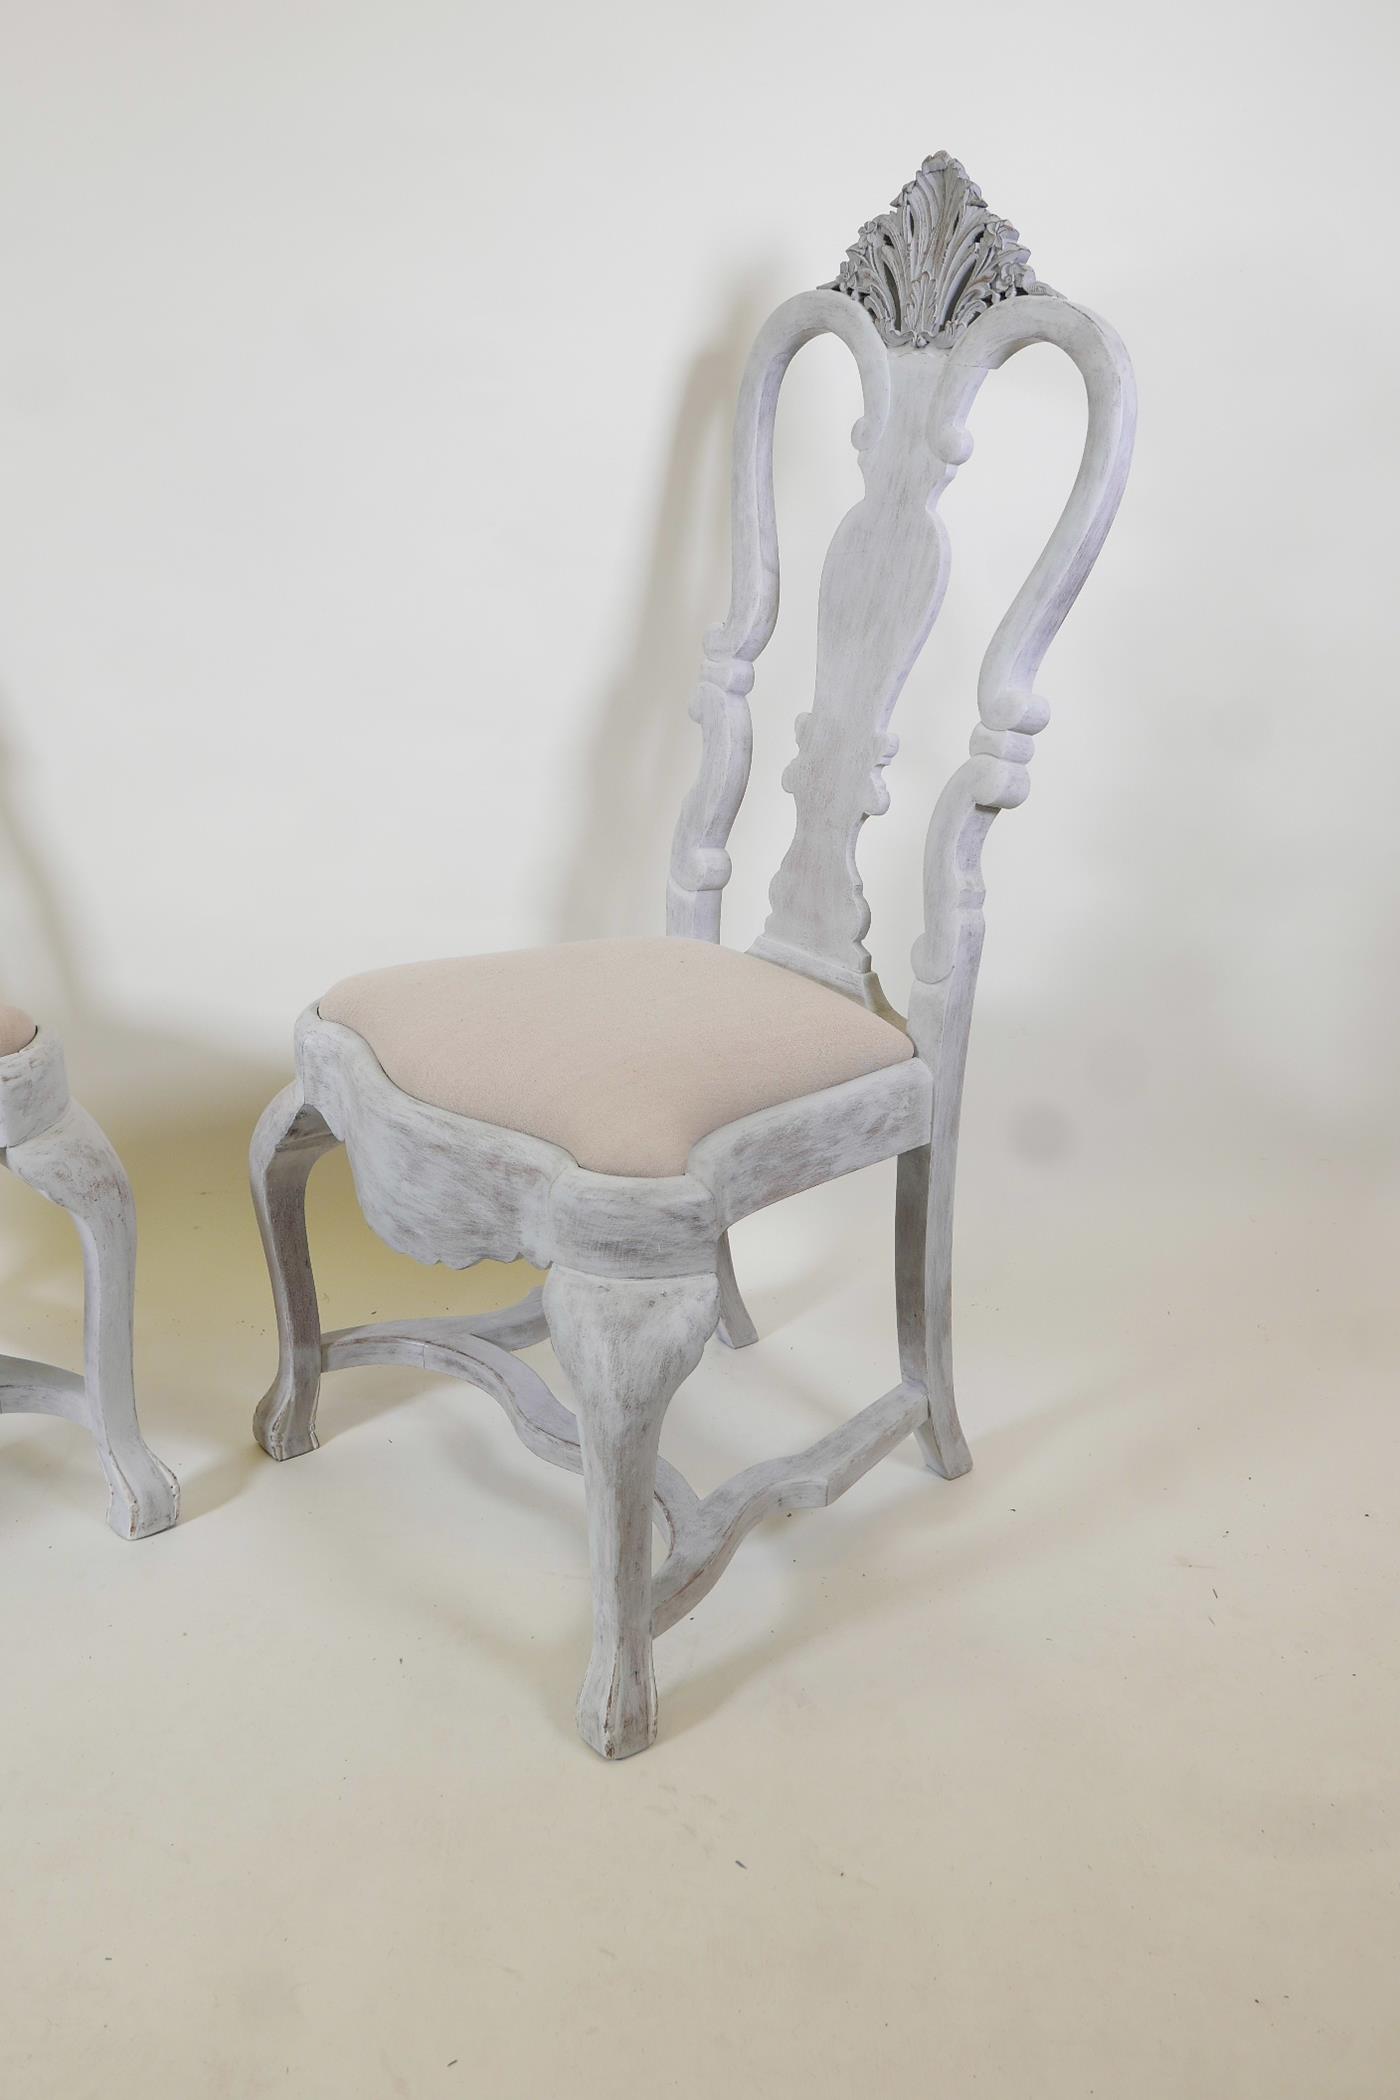 A pair of early C20th Gustavian style painted and distressed chairs, with carved details, 45" high - Image 2 of 3